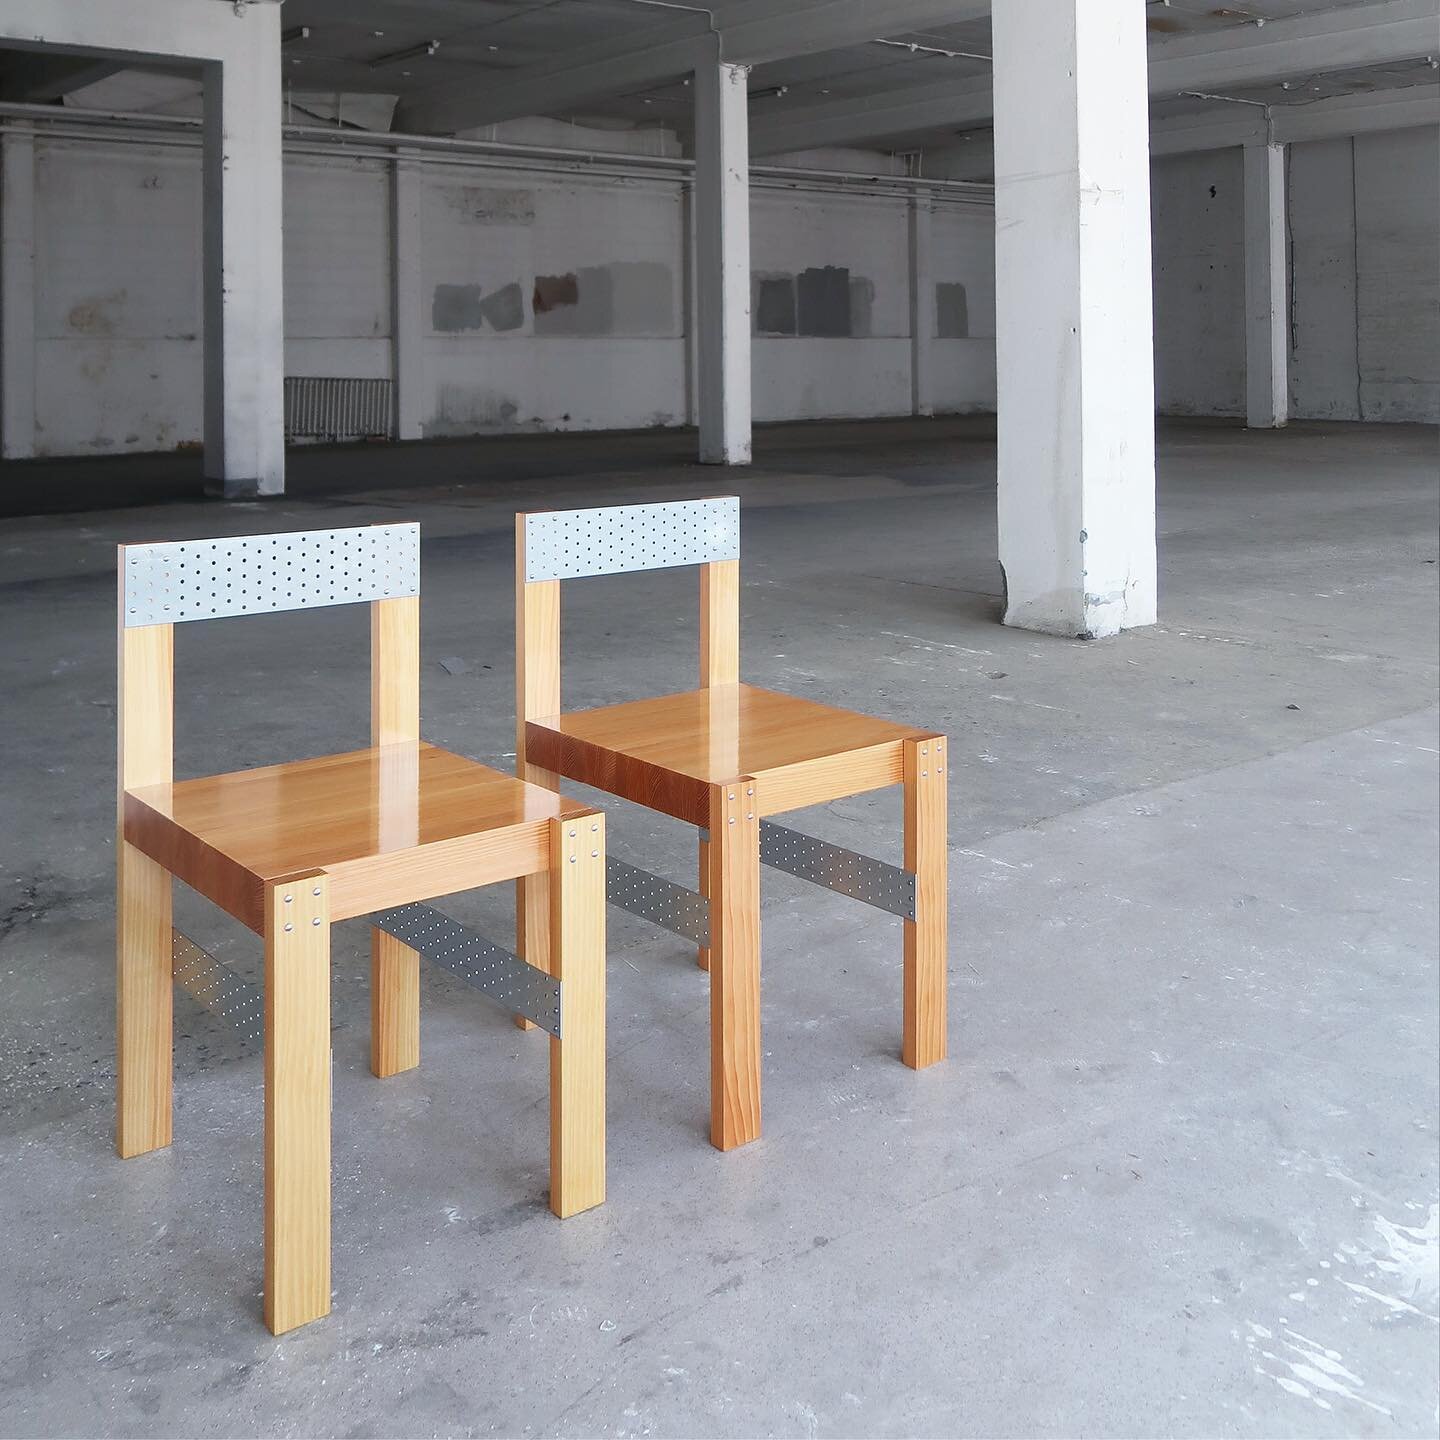 CONSTRUCTION CHAIRS 

A set of chairs where industrial elements from building construction meets the detailed language of fine woodworking - celebrating the tension between rough and fine, machine made and handmade, industry and human.

Handcrafted f